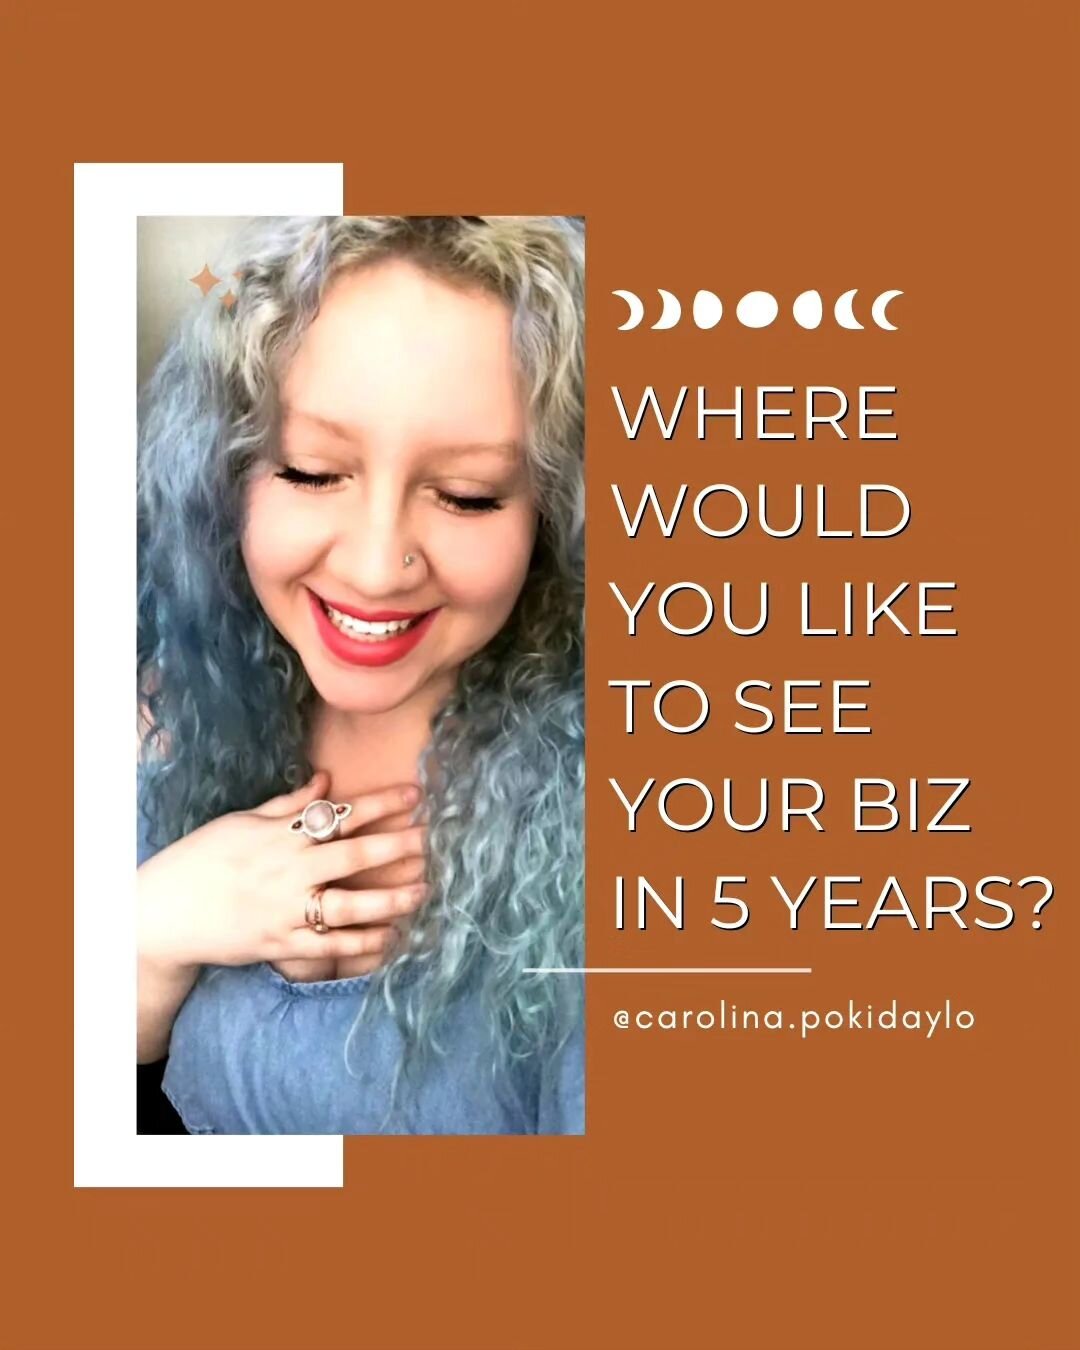 One of my favorite things to ask entrepreneurs I meet, including my clients, is 👇

 Where would you like to see your biz in 5 years? 🤔

I feel this question opens the doors to great conversations. It allows us to dream of the future, hold our busin